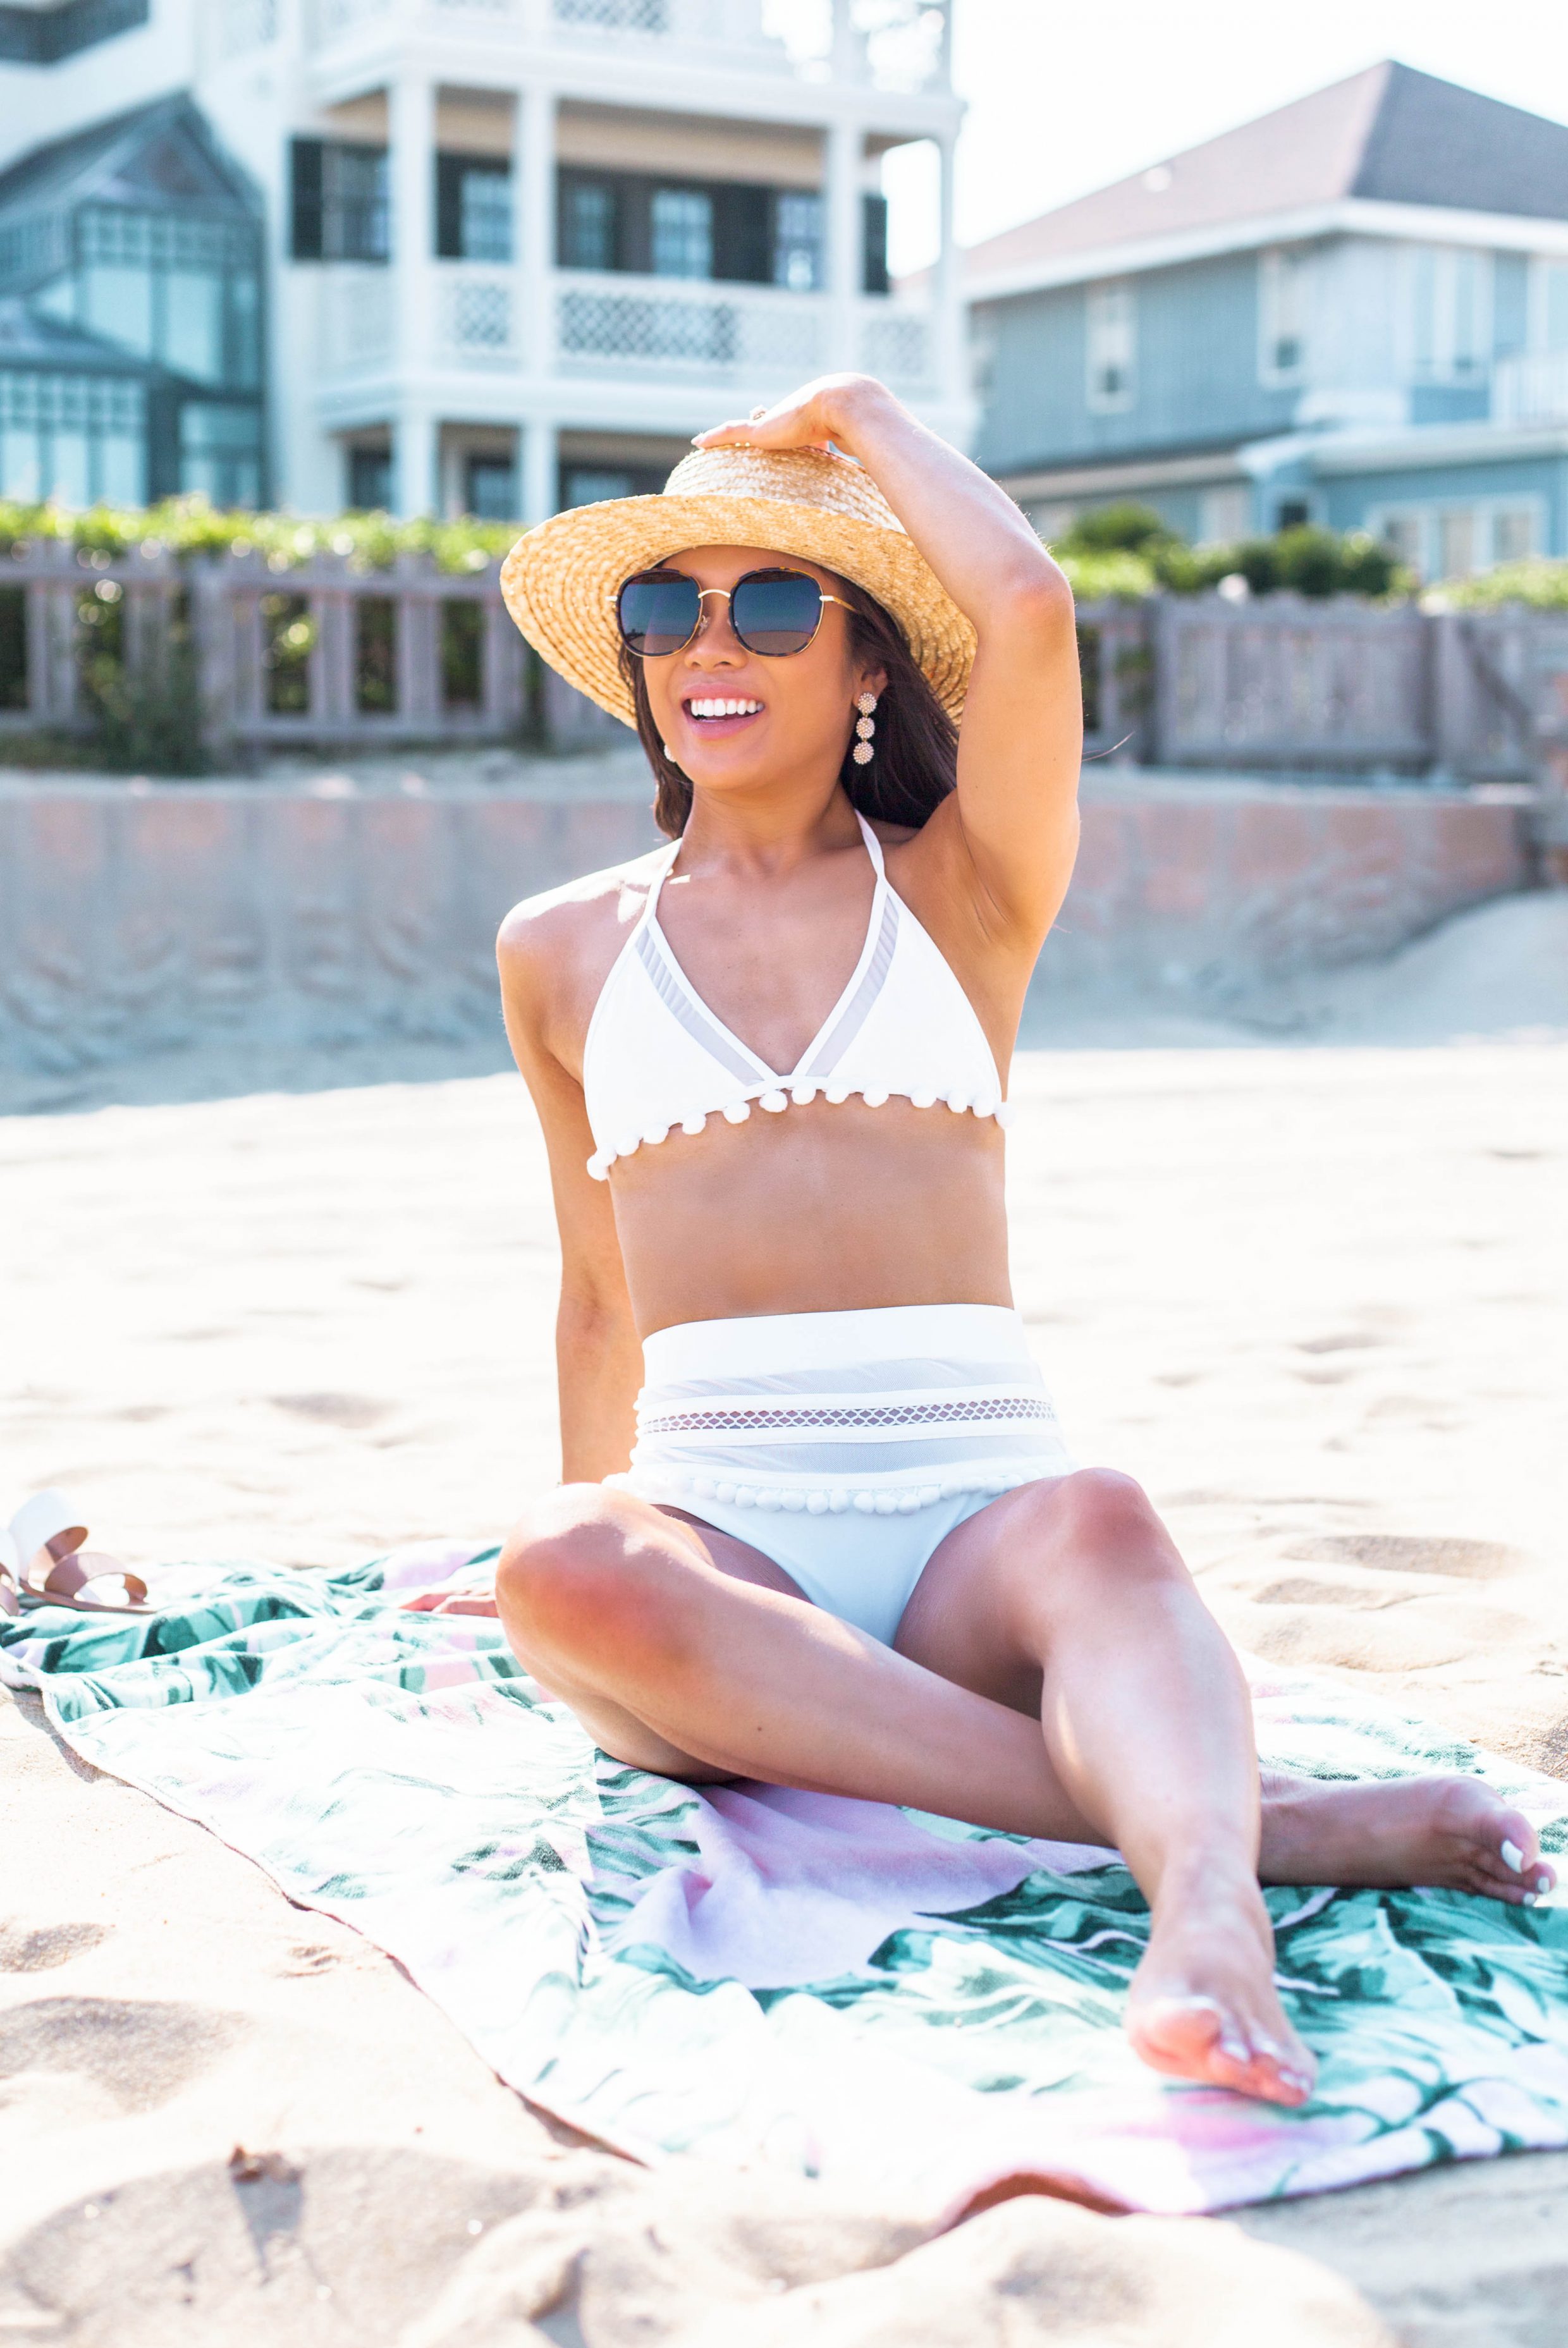 Bogholder Lyn announcer The Swimsuit You Need :: White High-Waisted Bikini - Color & Chic